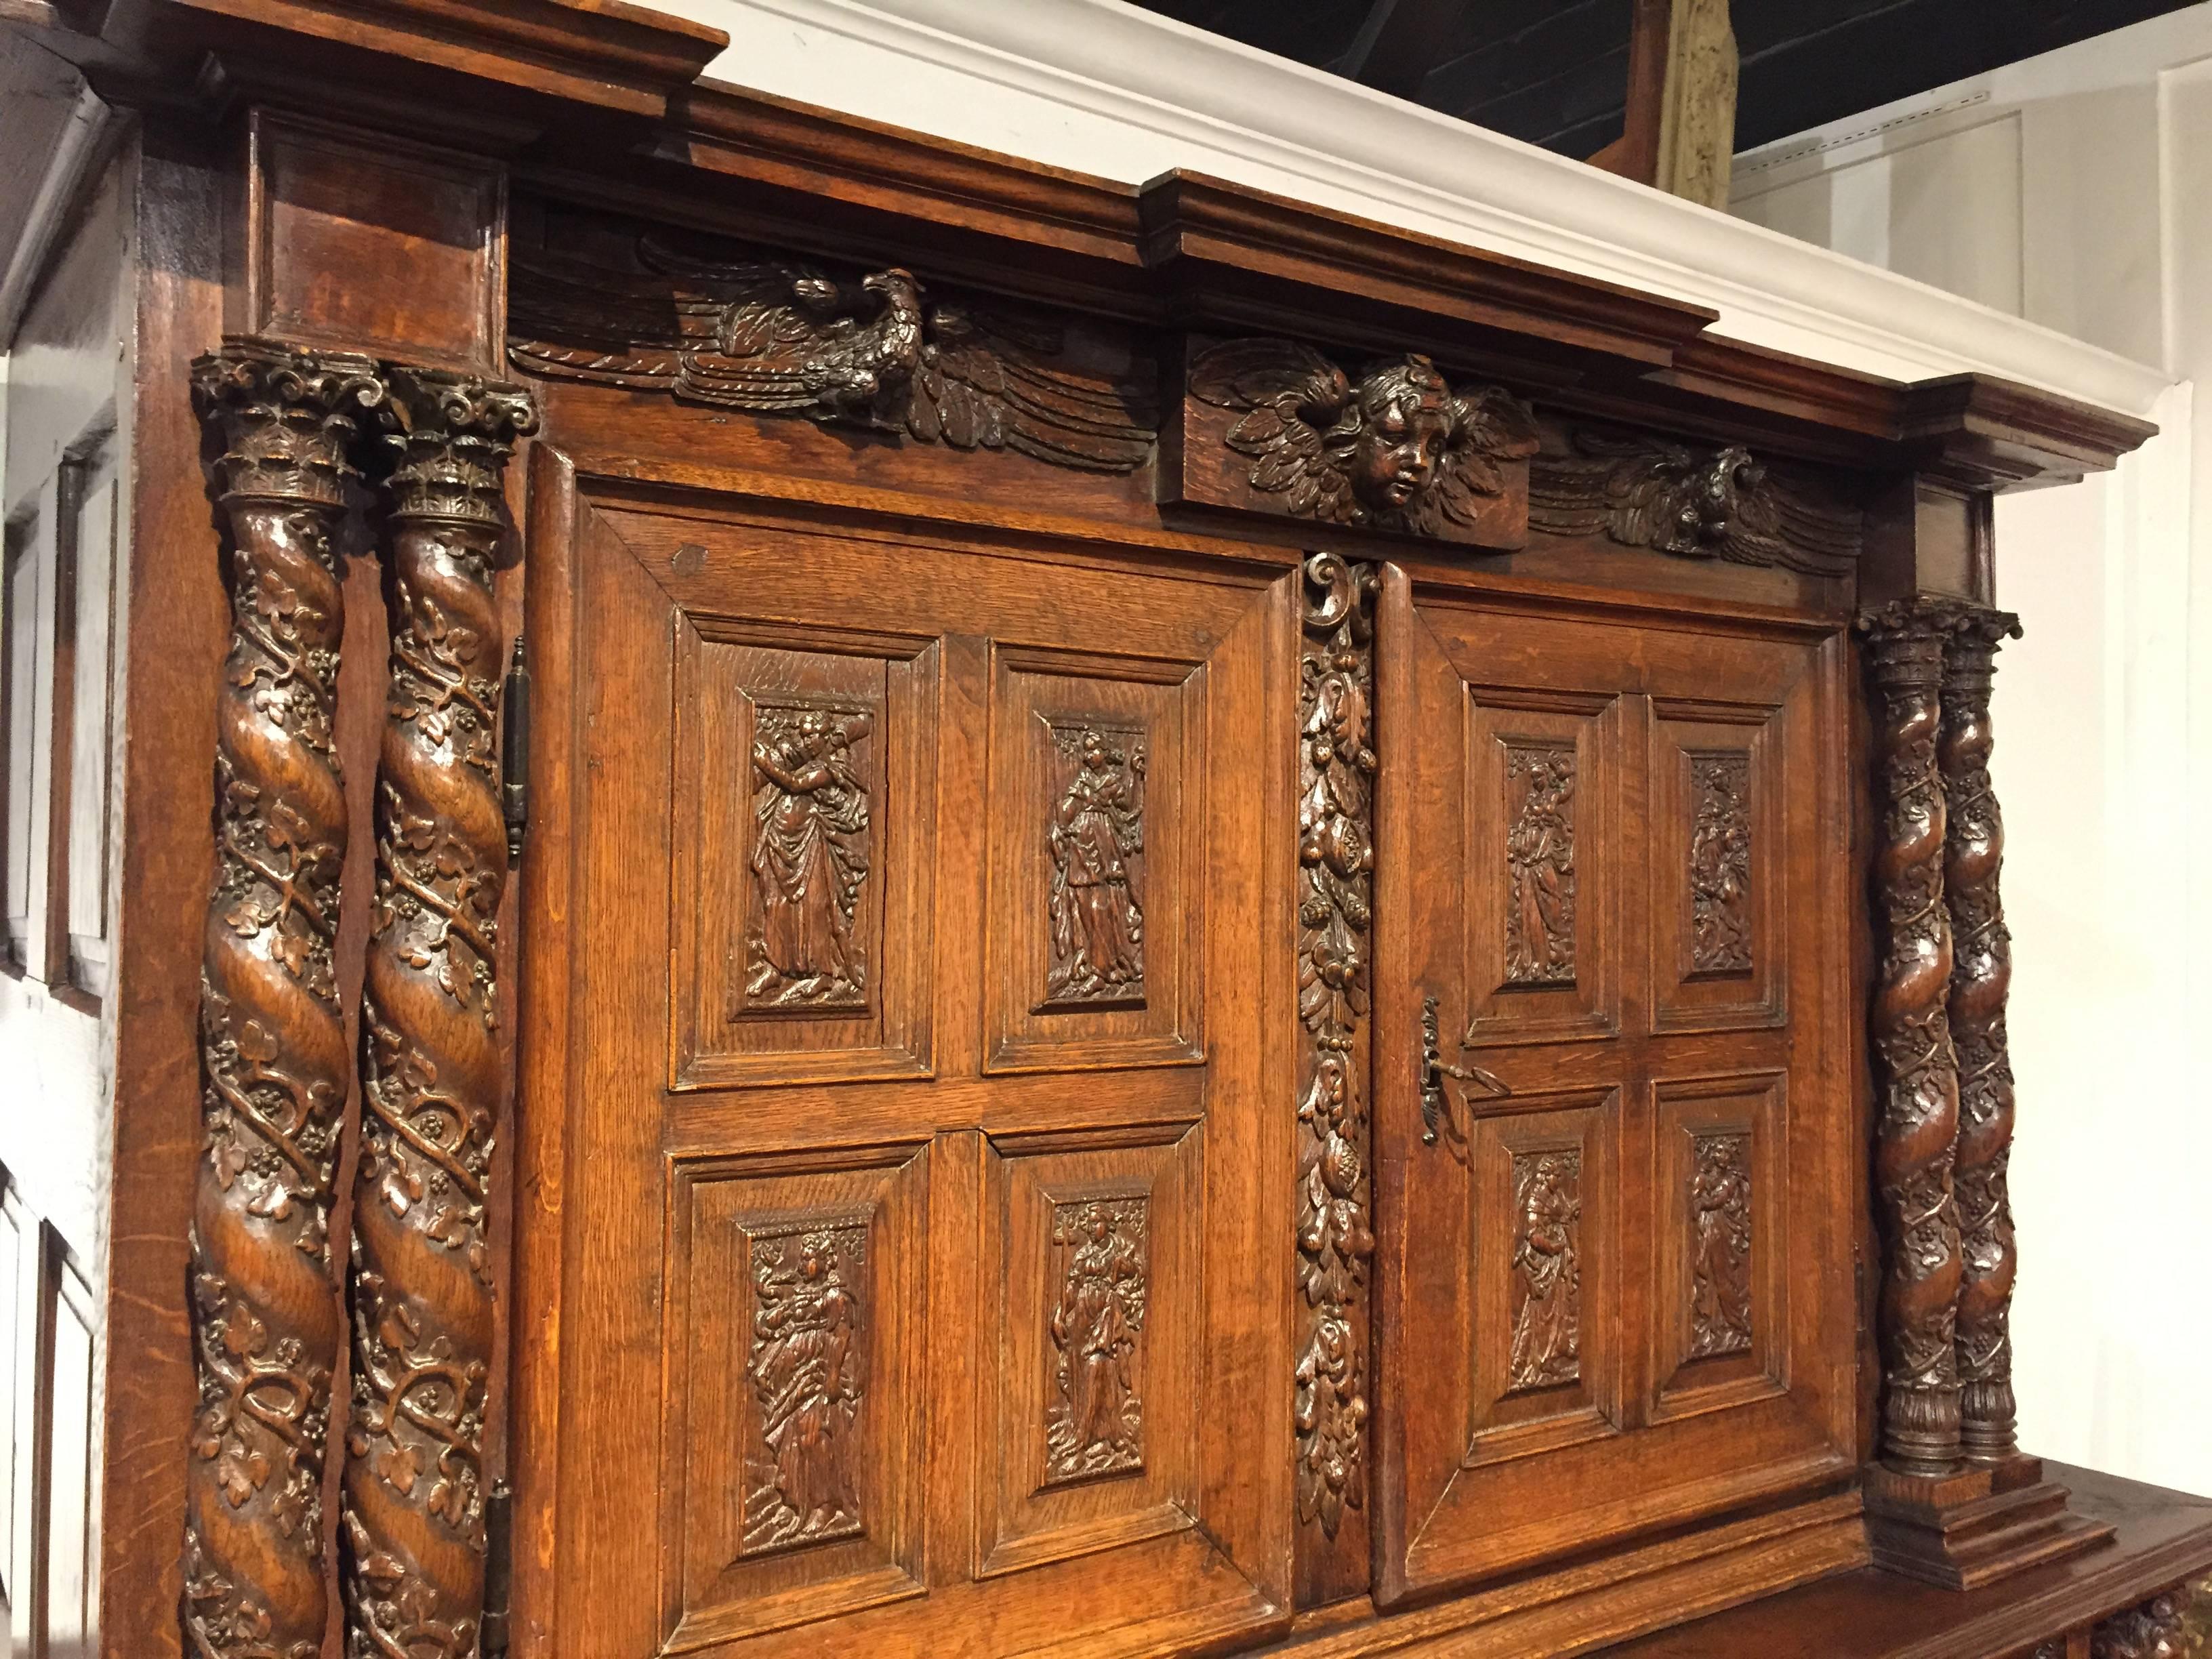 Carved Rare Late Renaissance Cabinet from France, 17th Century